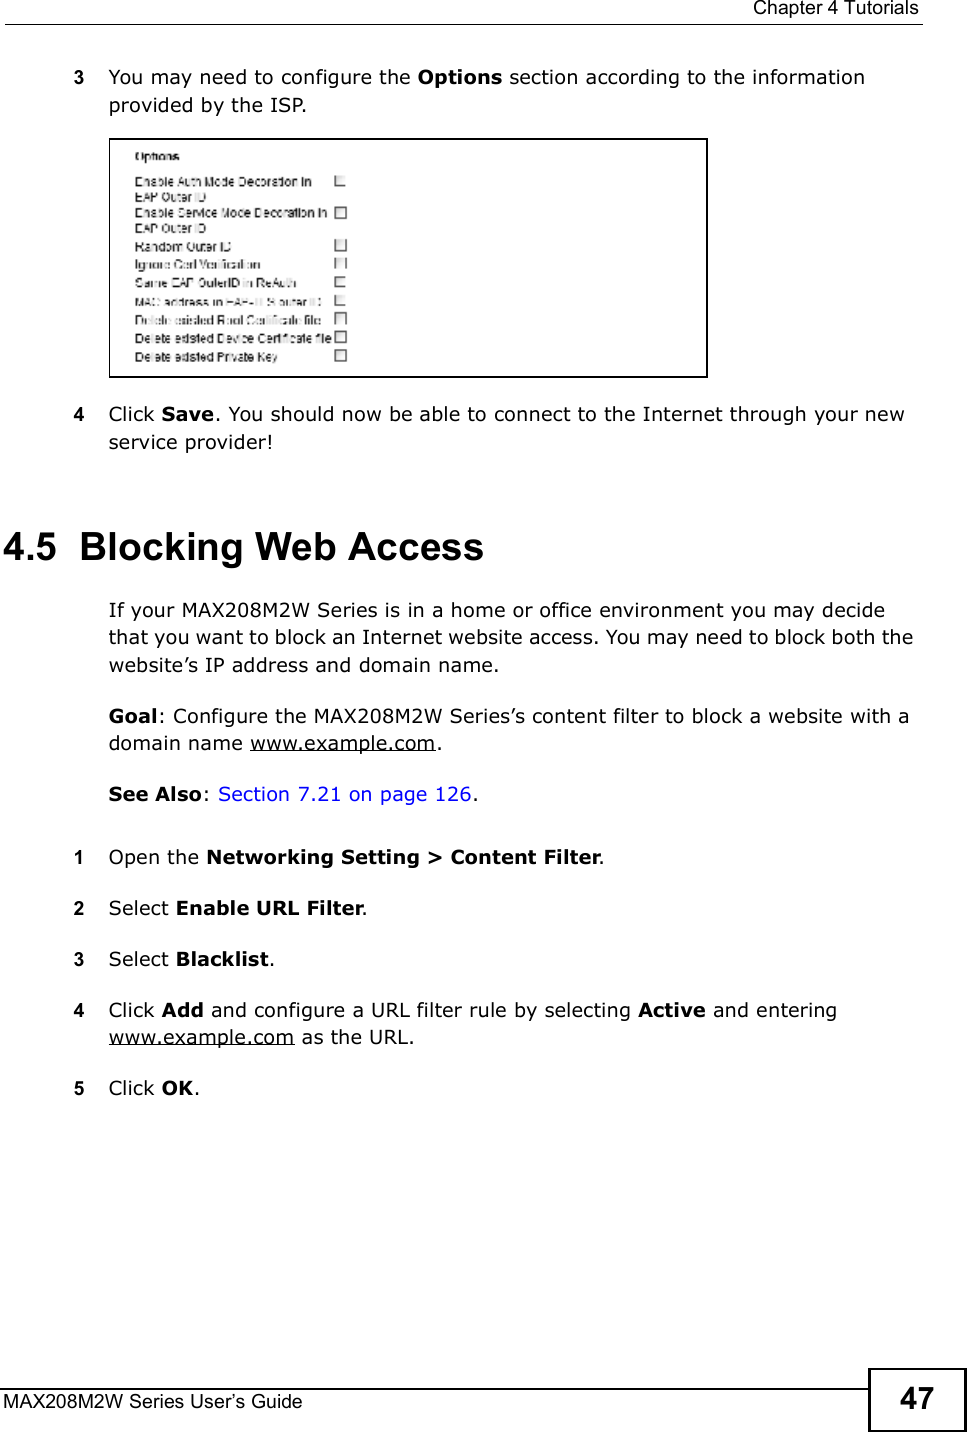  Chapter 4TutorialsMAX208M2W Series User s Guide 473You may need to configure the Options section according to the information provided by the ISP.4Click Save. You should now be able to connect to the Internet through your new service provider!4.5  Blocking Web AccessIf your MAX208M2W Series is in a home or office environment you may decide that you want to block an Internet website access. You may need to block both the website s IP address and domain name.Goal: Configure the MAX208M2W Series s content filter to block a website with a domain name www.example.com.See Also: Section 7.21 on page 126.1Open the Networking Setting &gt; Content Filter.2Select Enable URL Filter.3Select Blacklist.4Click Add and configure a URL filter rule by selecting Active and entering www.example.com as the URL.5Click OK.